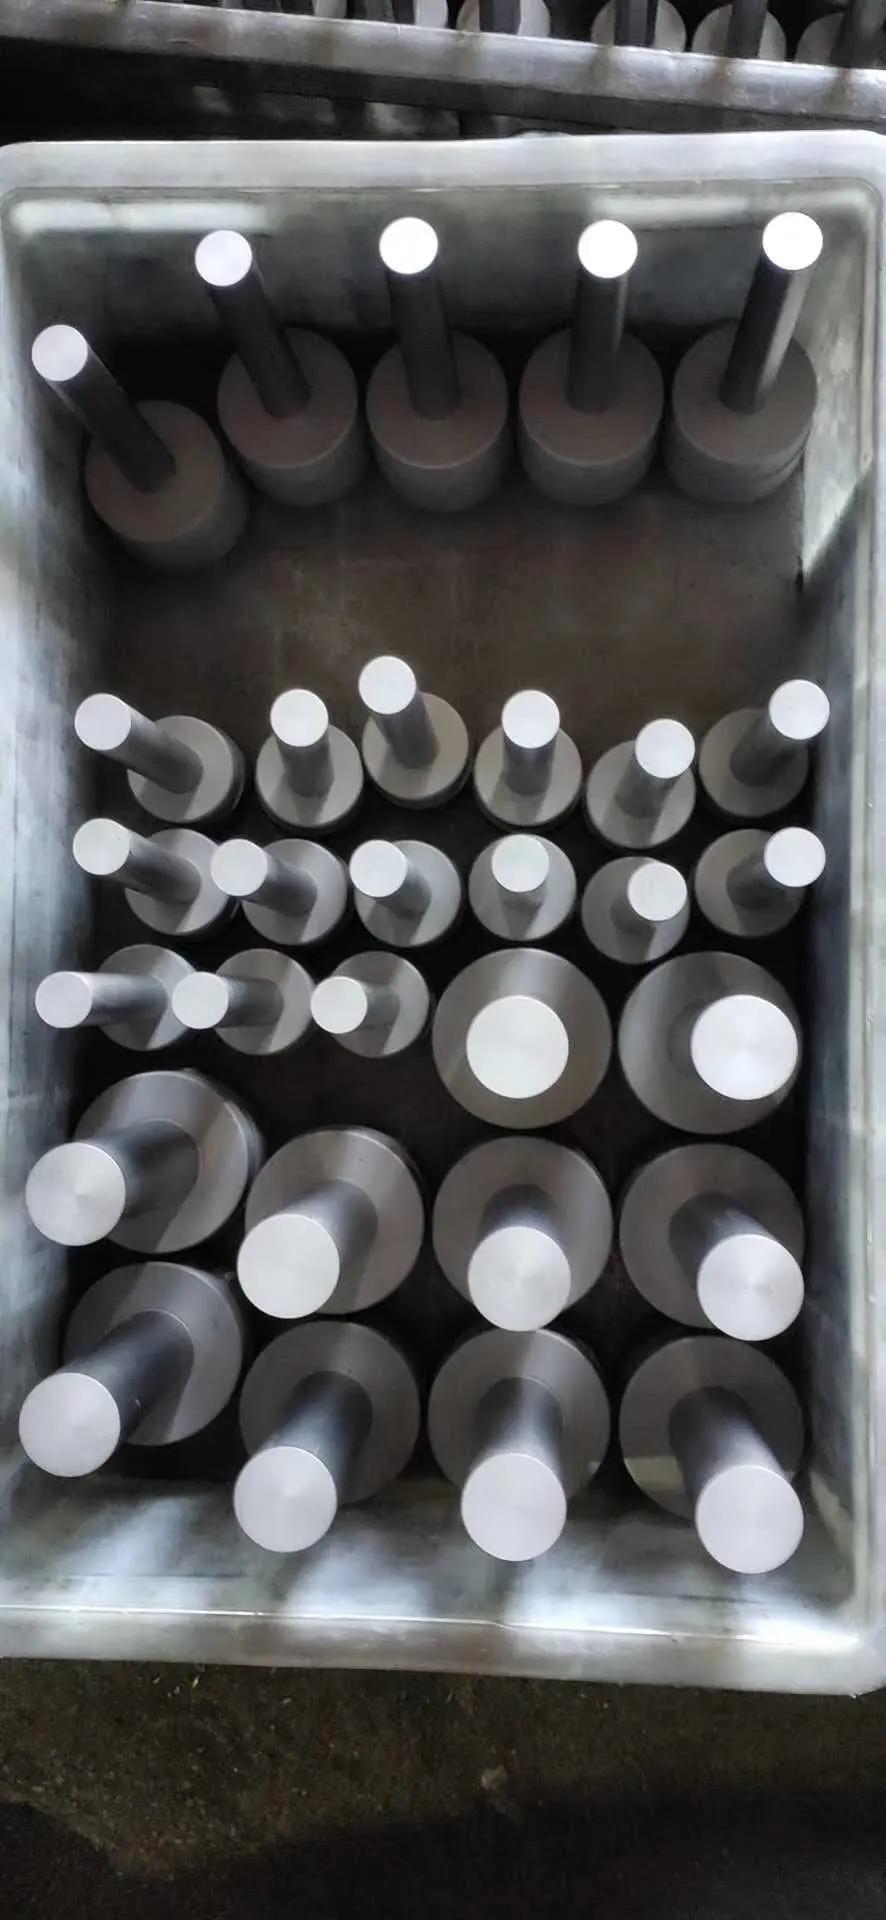 Chinese Supplier of Graphite Casting Melting Mold for Brass Bars, Rods, Tubes